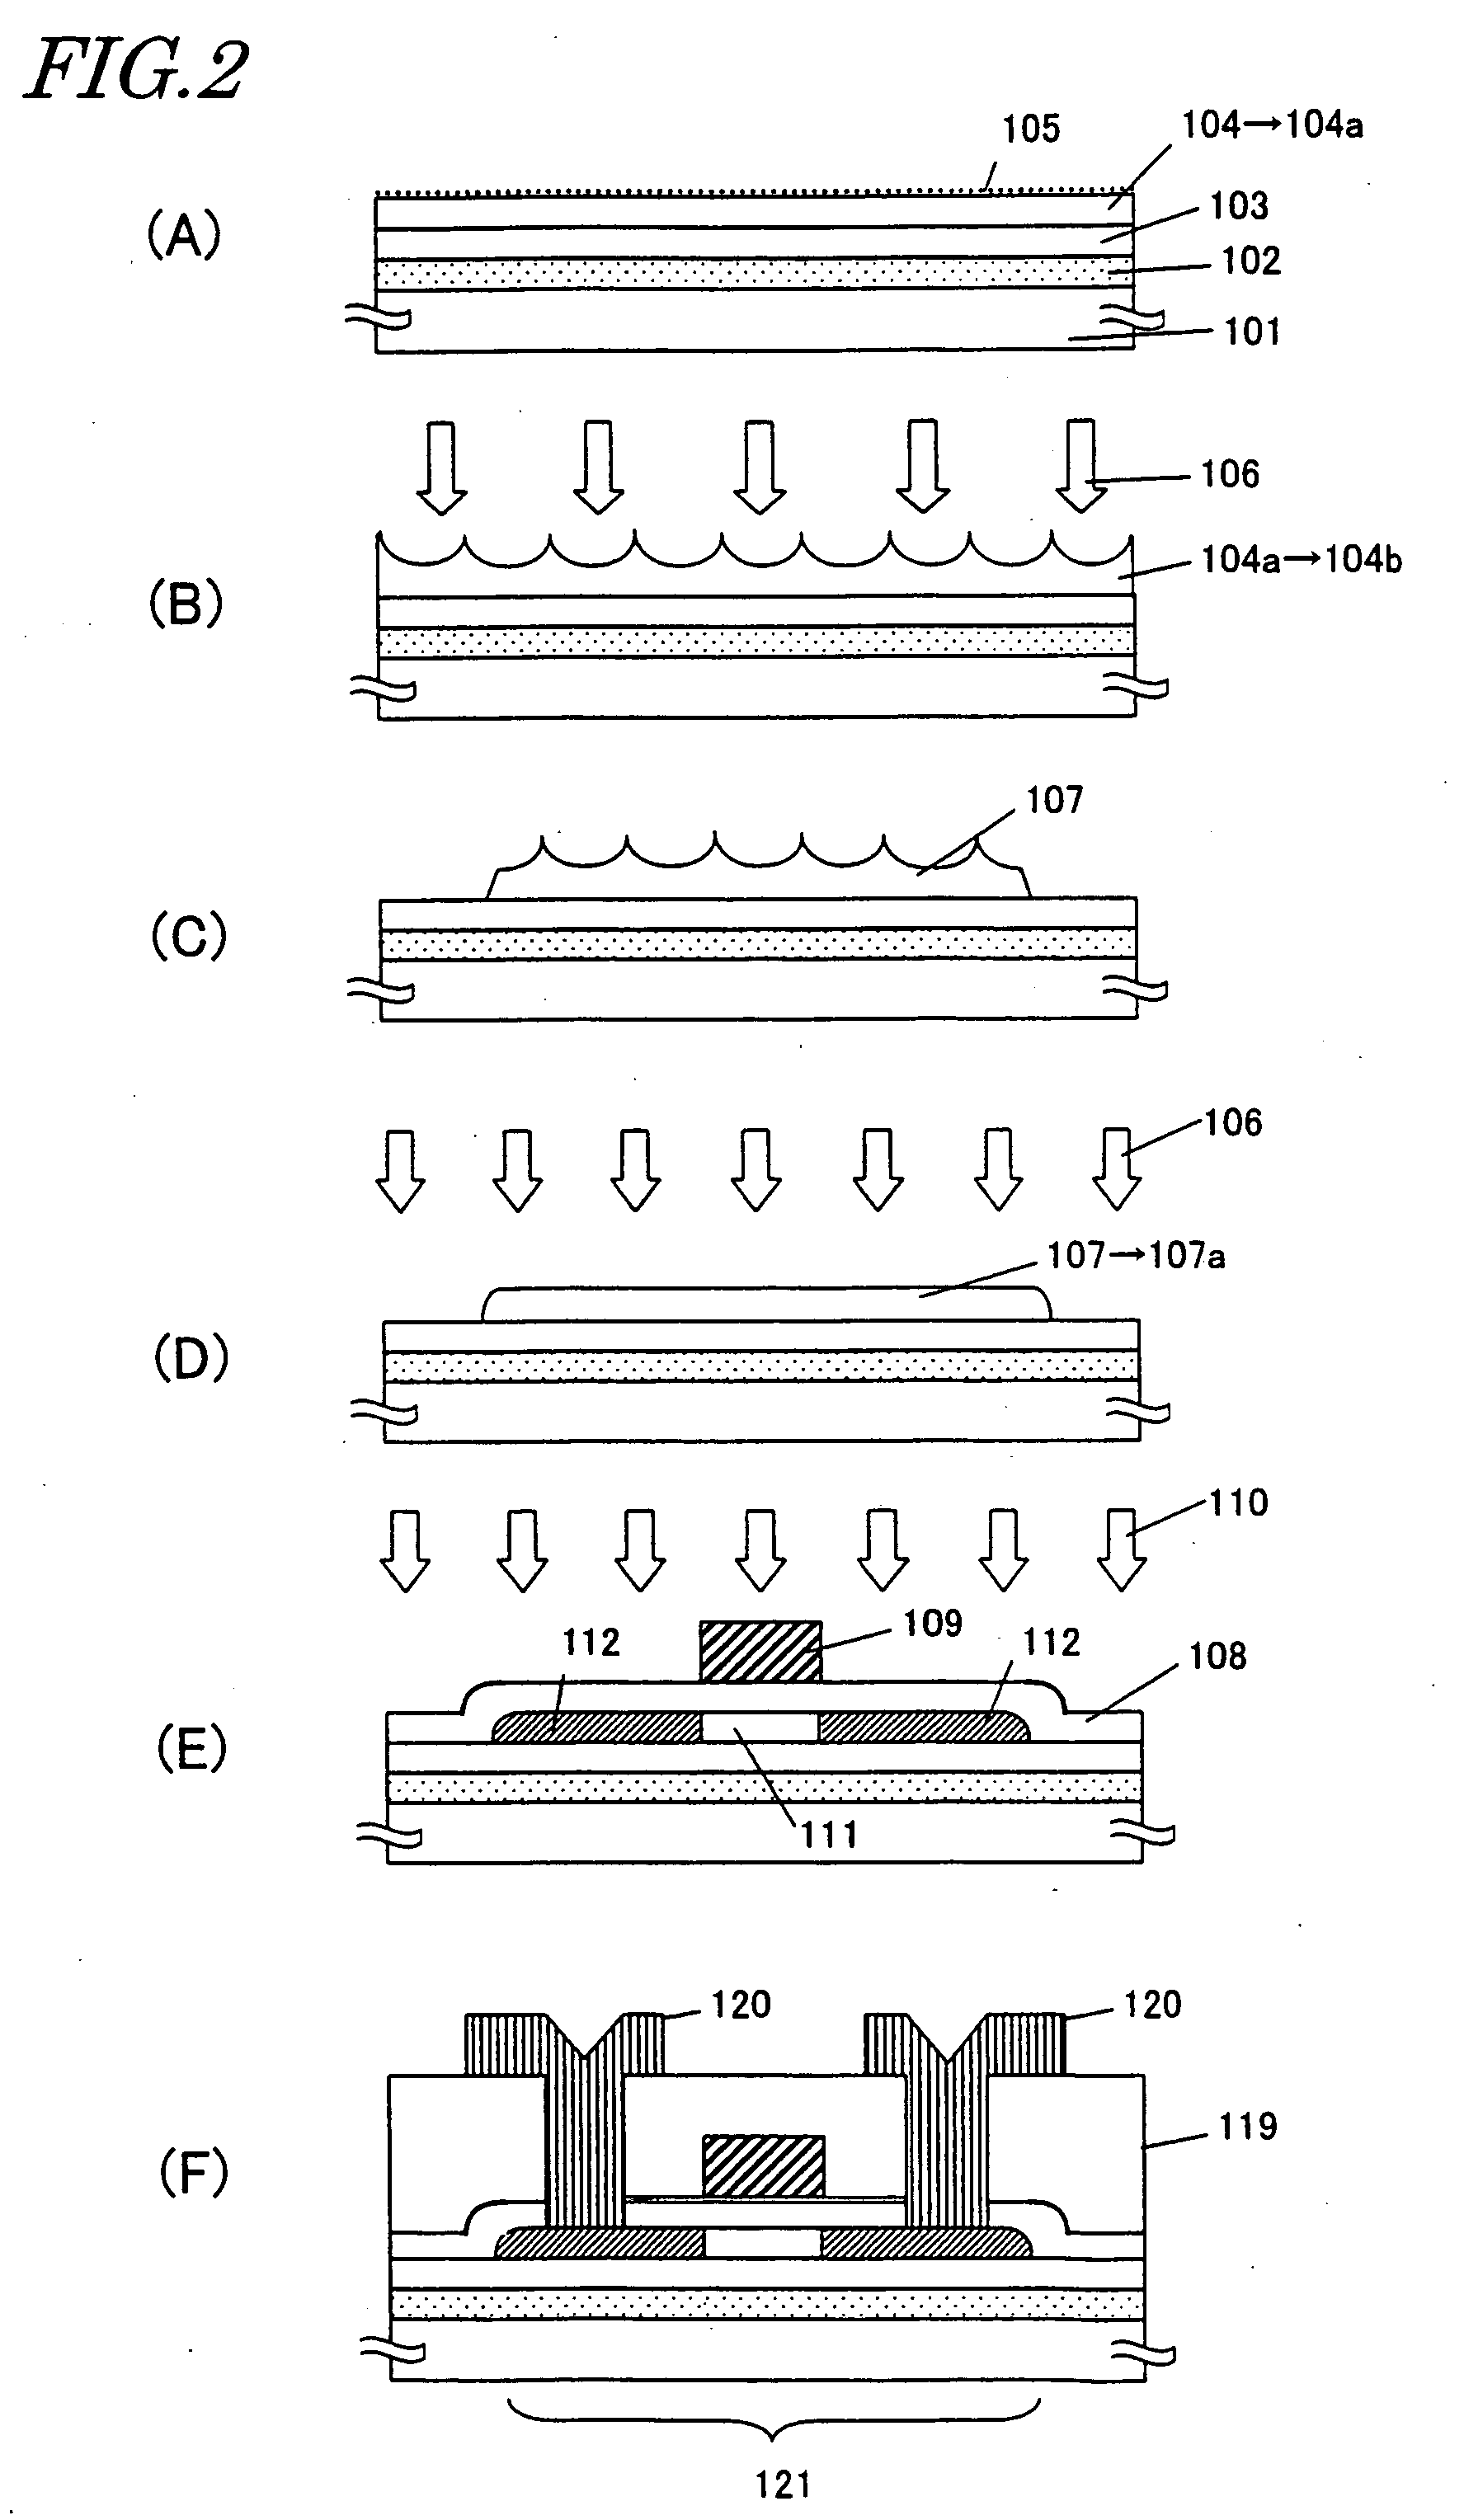 Crystalline Semicondutor Film and Method for Manufacturing the Same